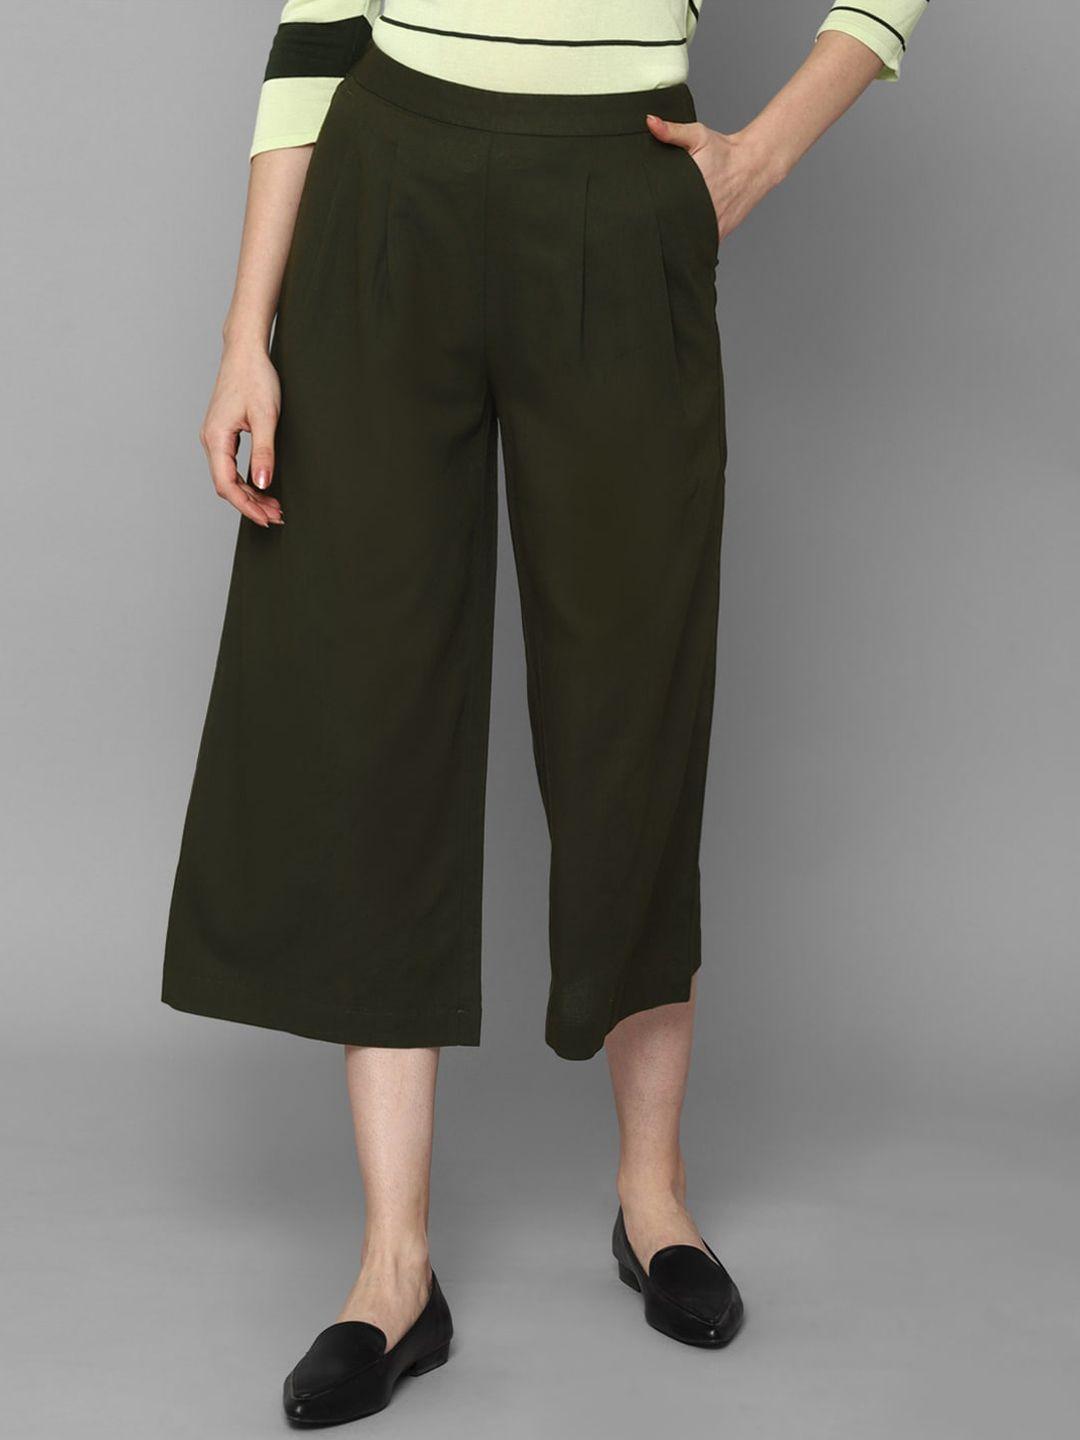 allen-solly-woman-women-olive-green-pleated-culottes-trousers